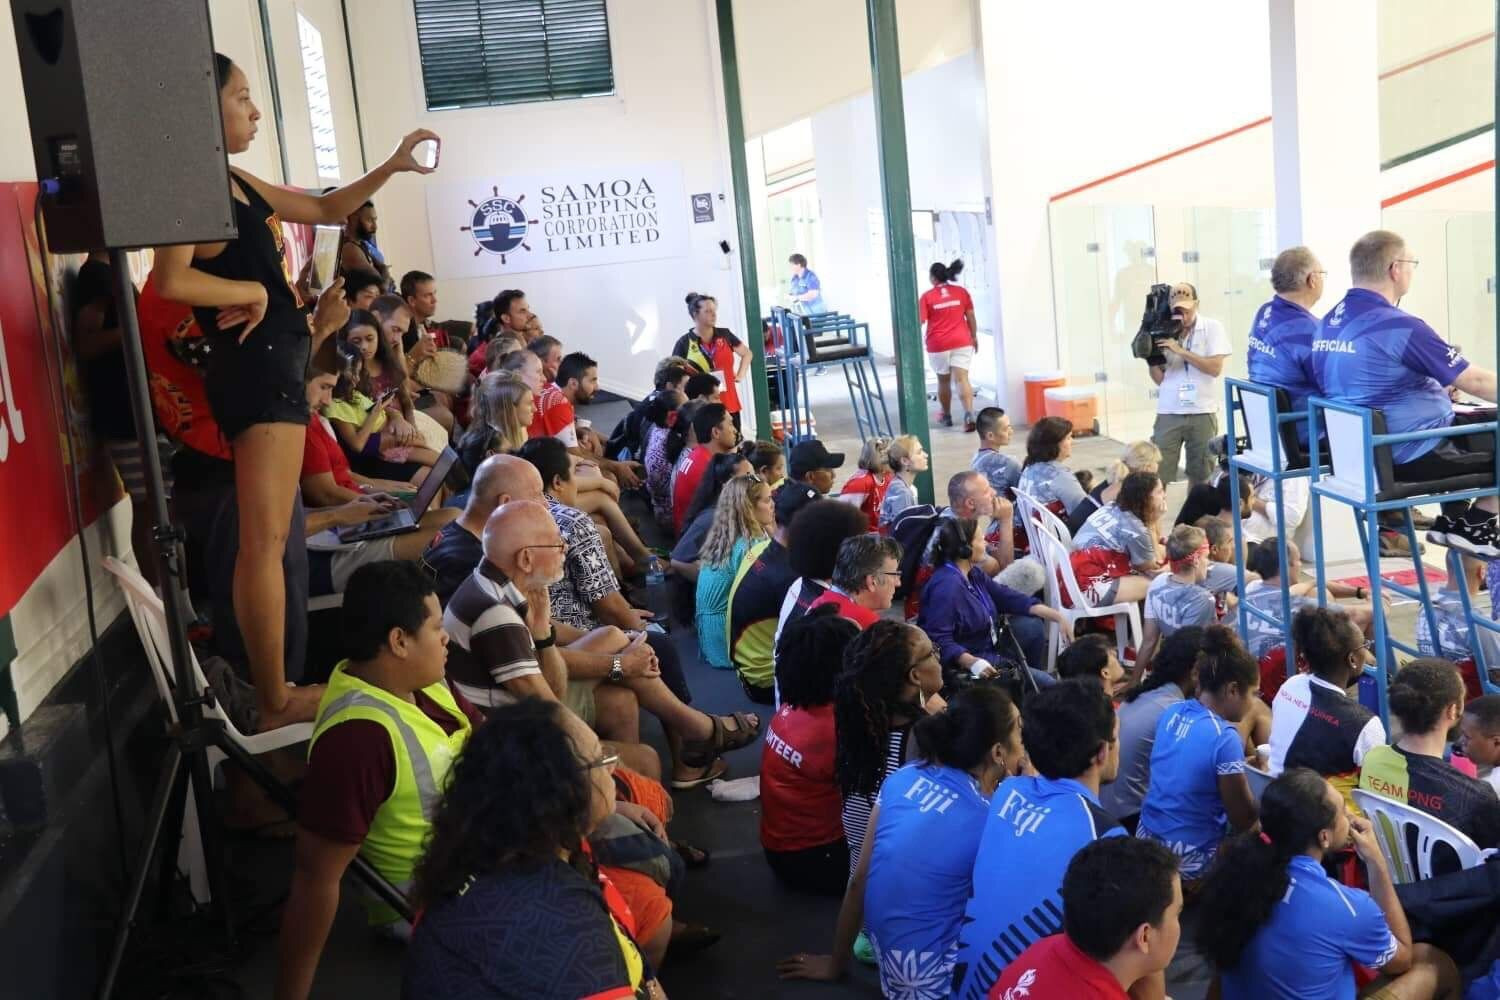 Plenty of fans and team mates crammed in to watch the squash action ©Games News Service